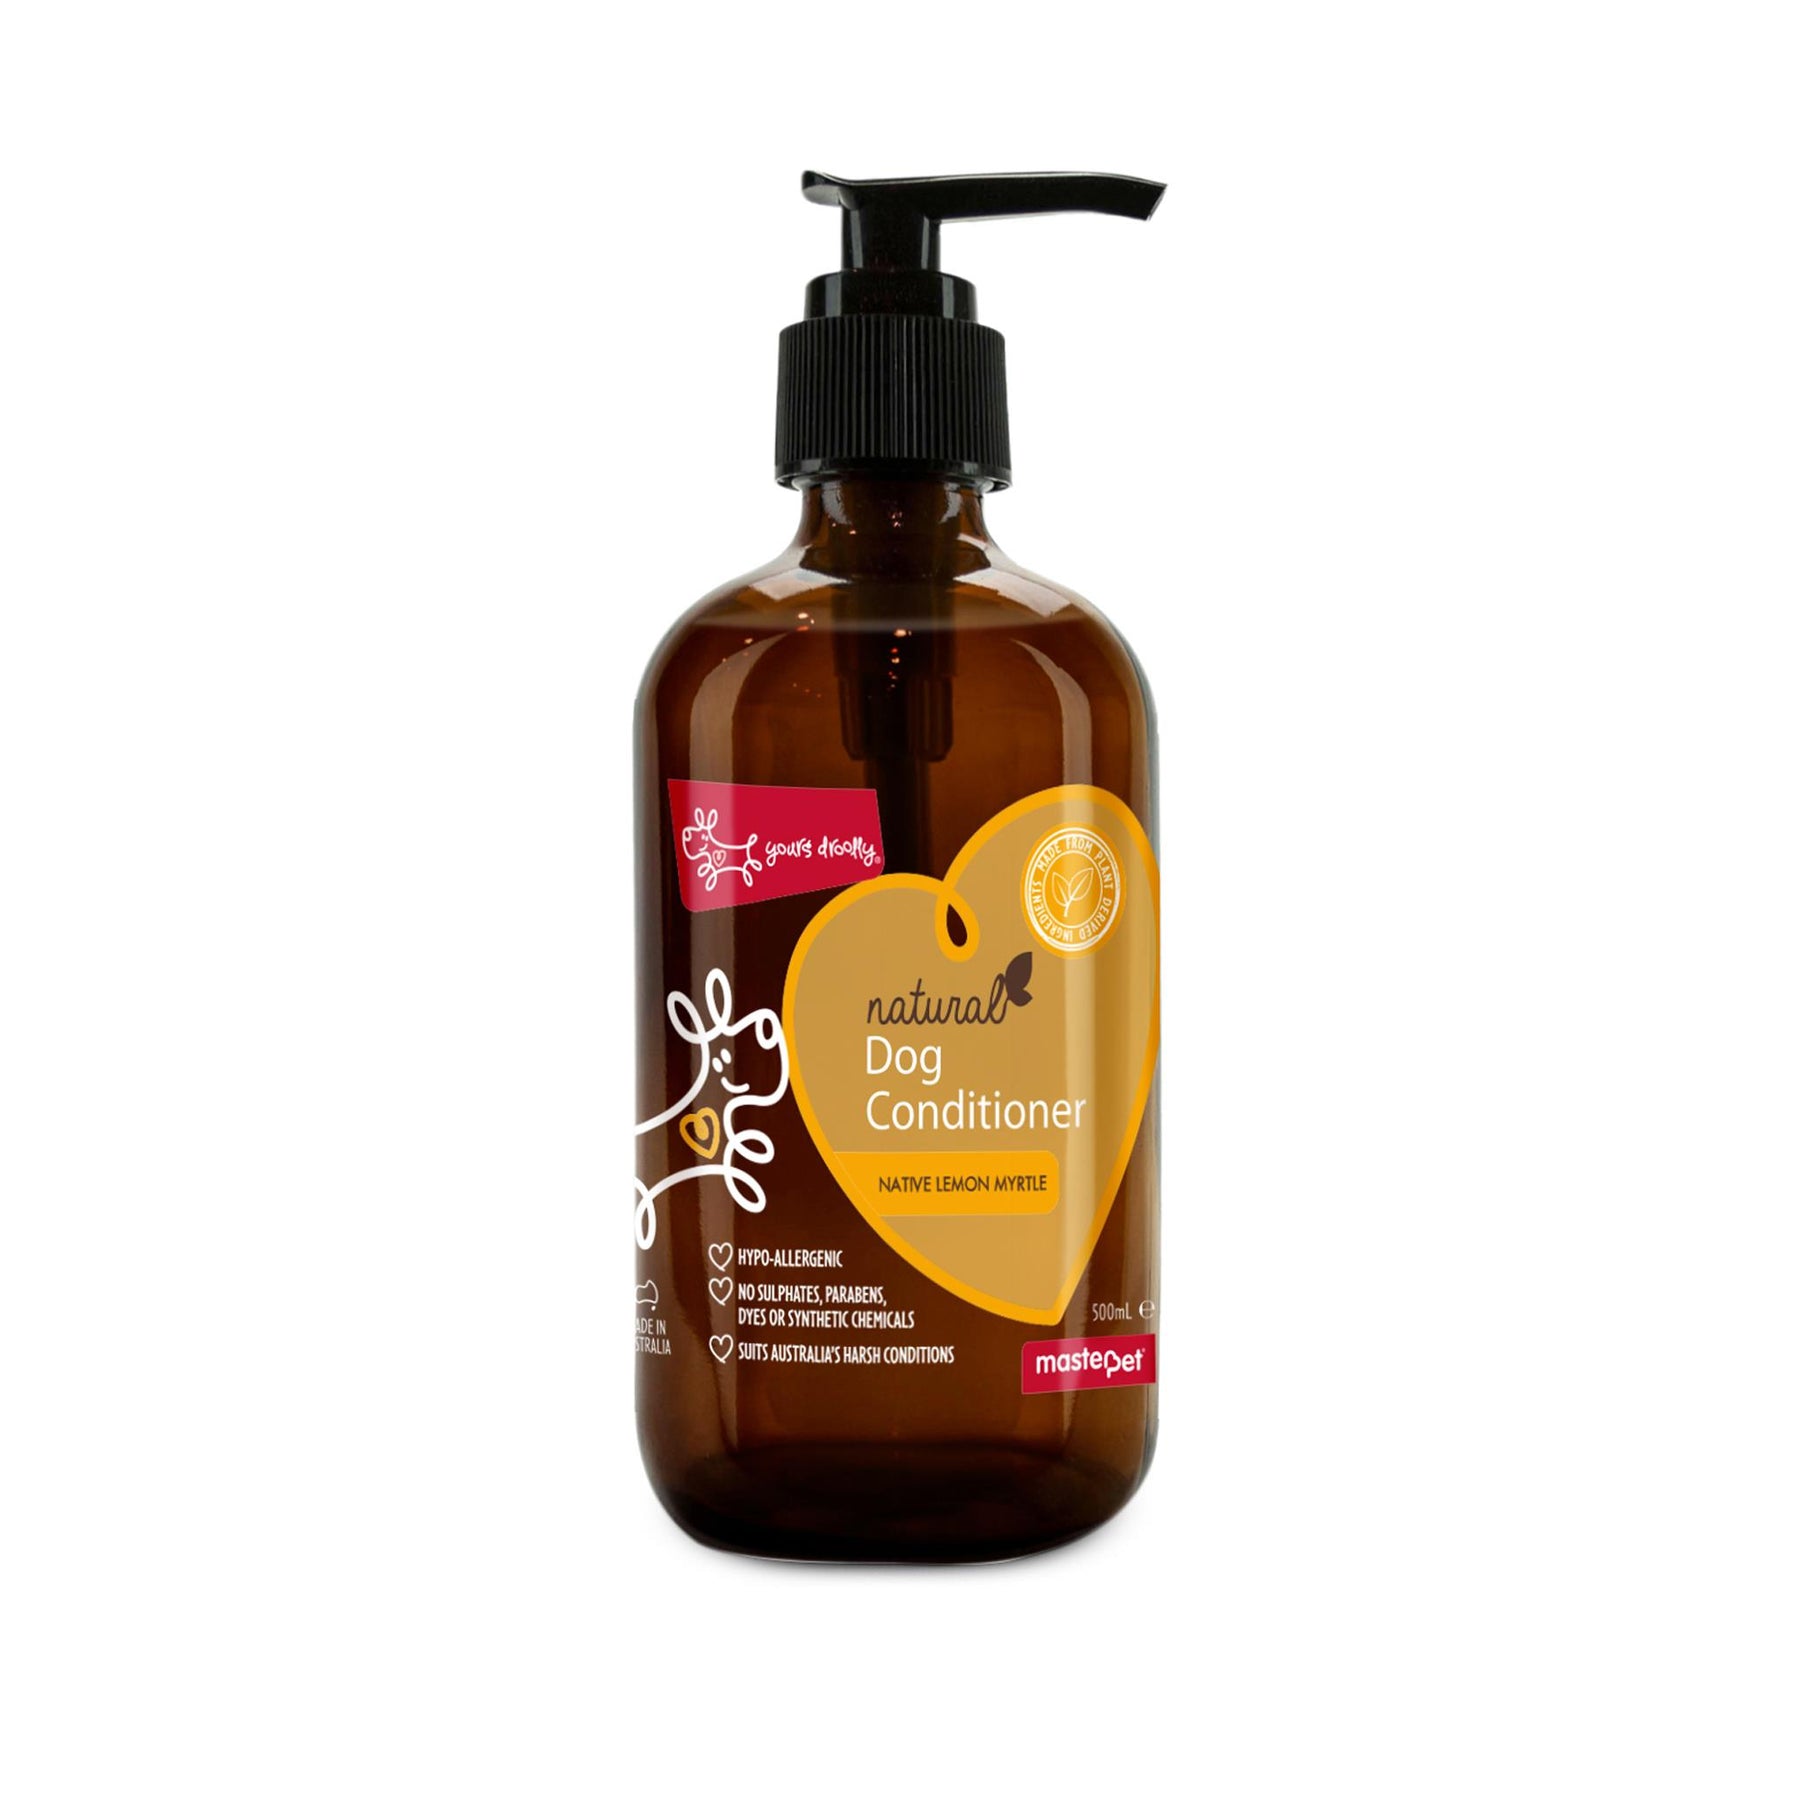 Yours Droolly Natural Conditioner 500ml